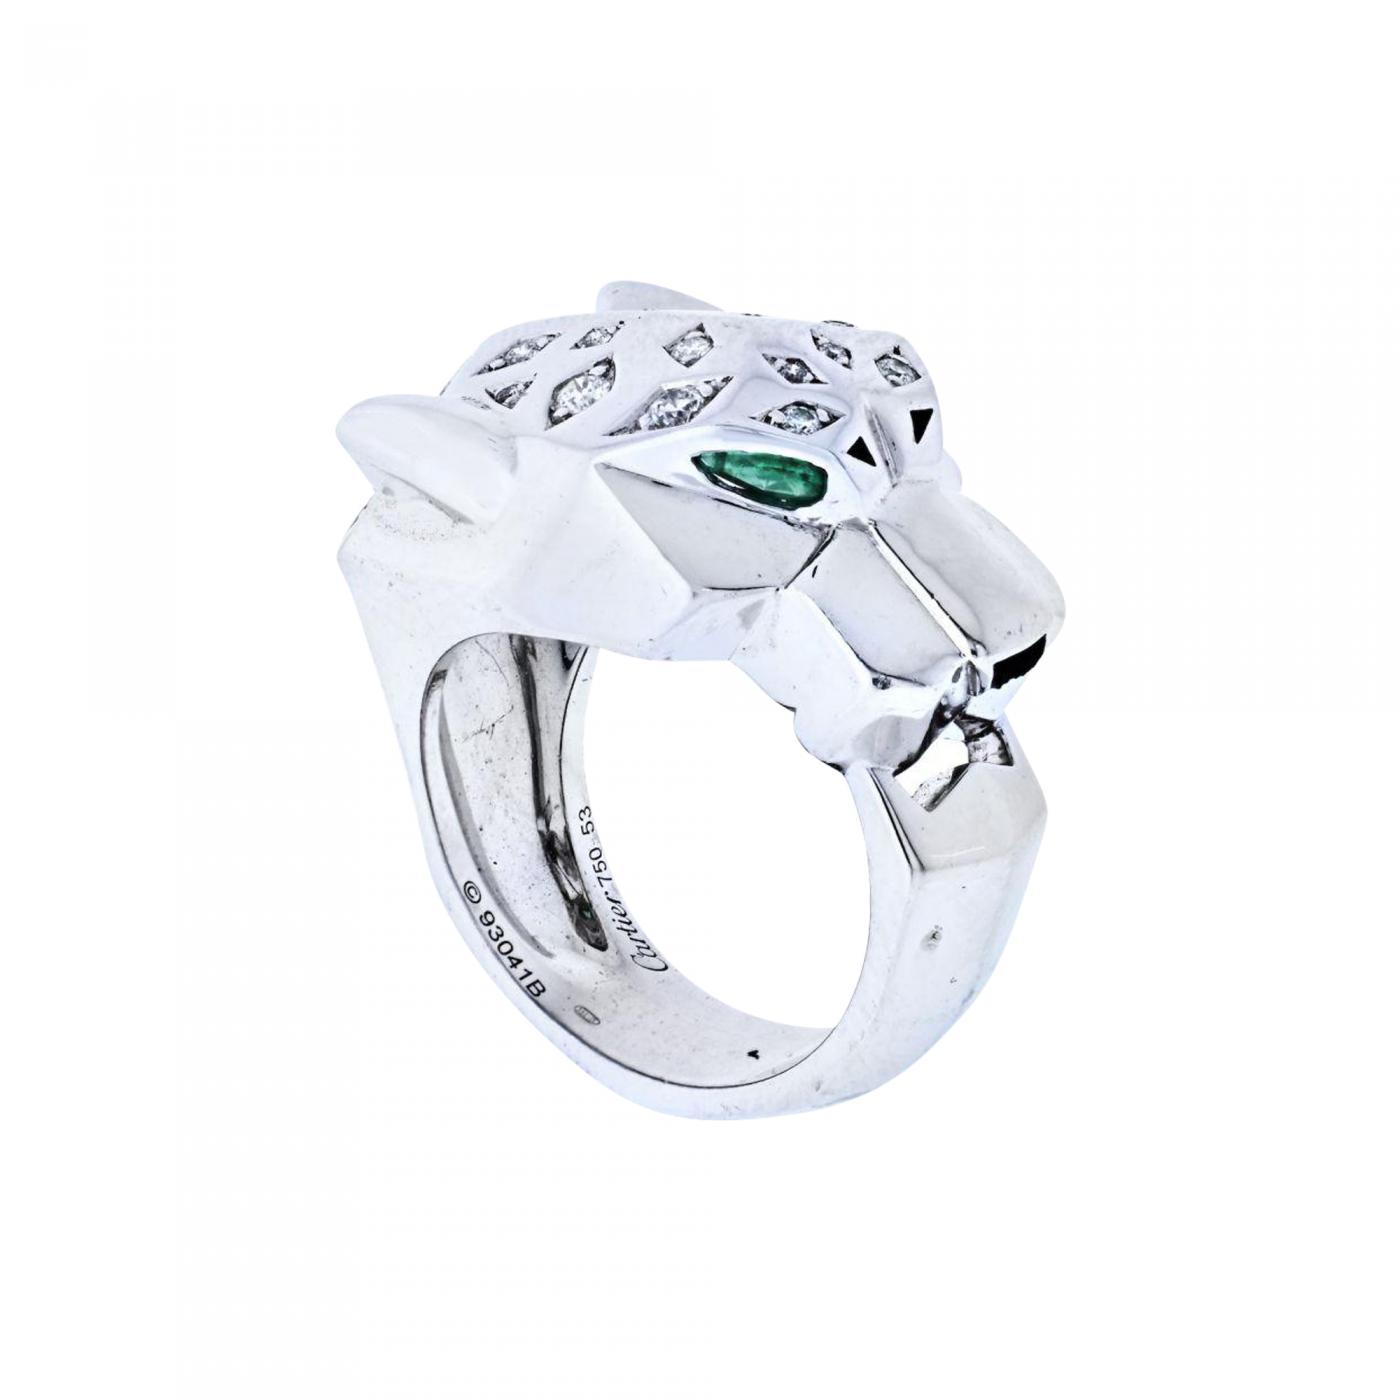 CARTIER RING - Provident Jewelry